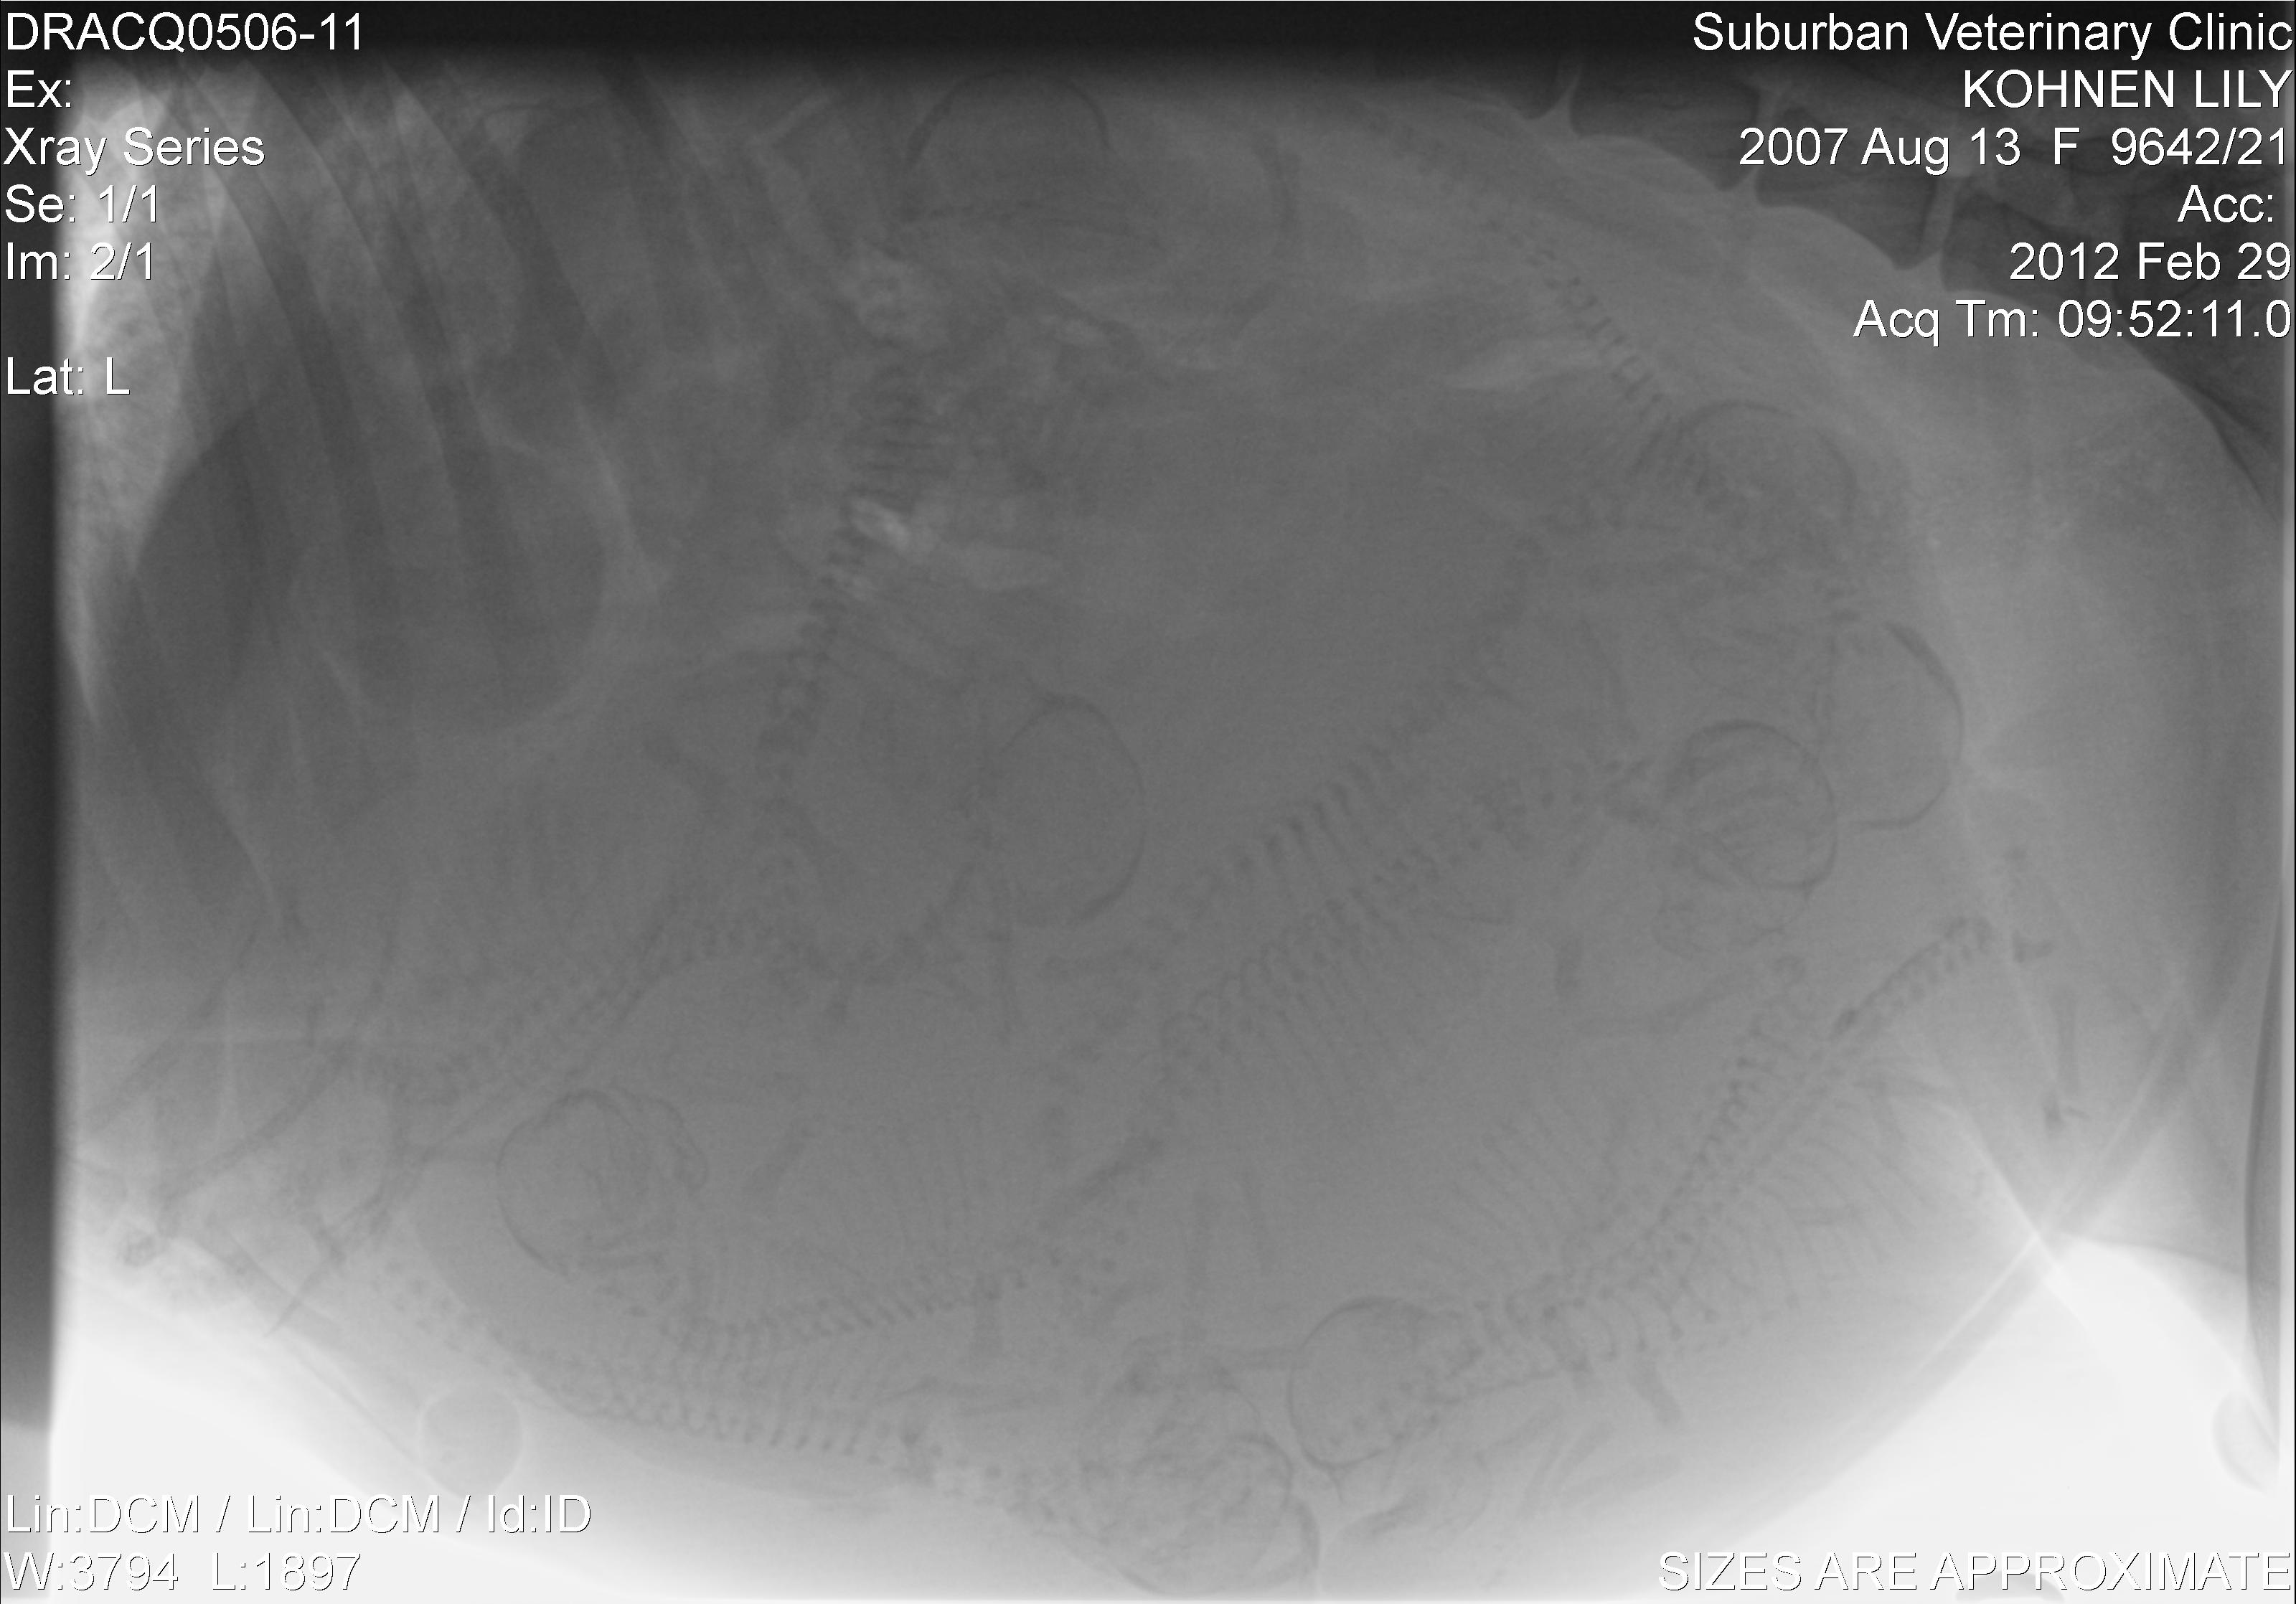 Lily's x-rays 2012